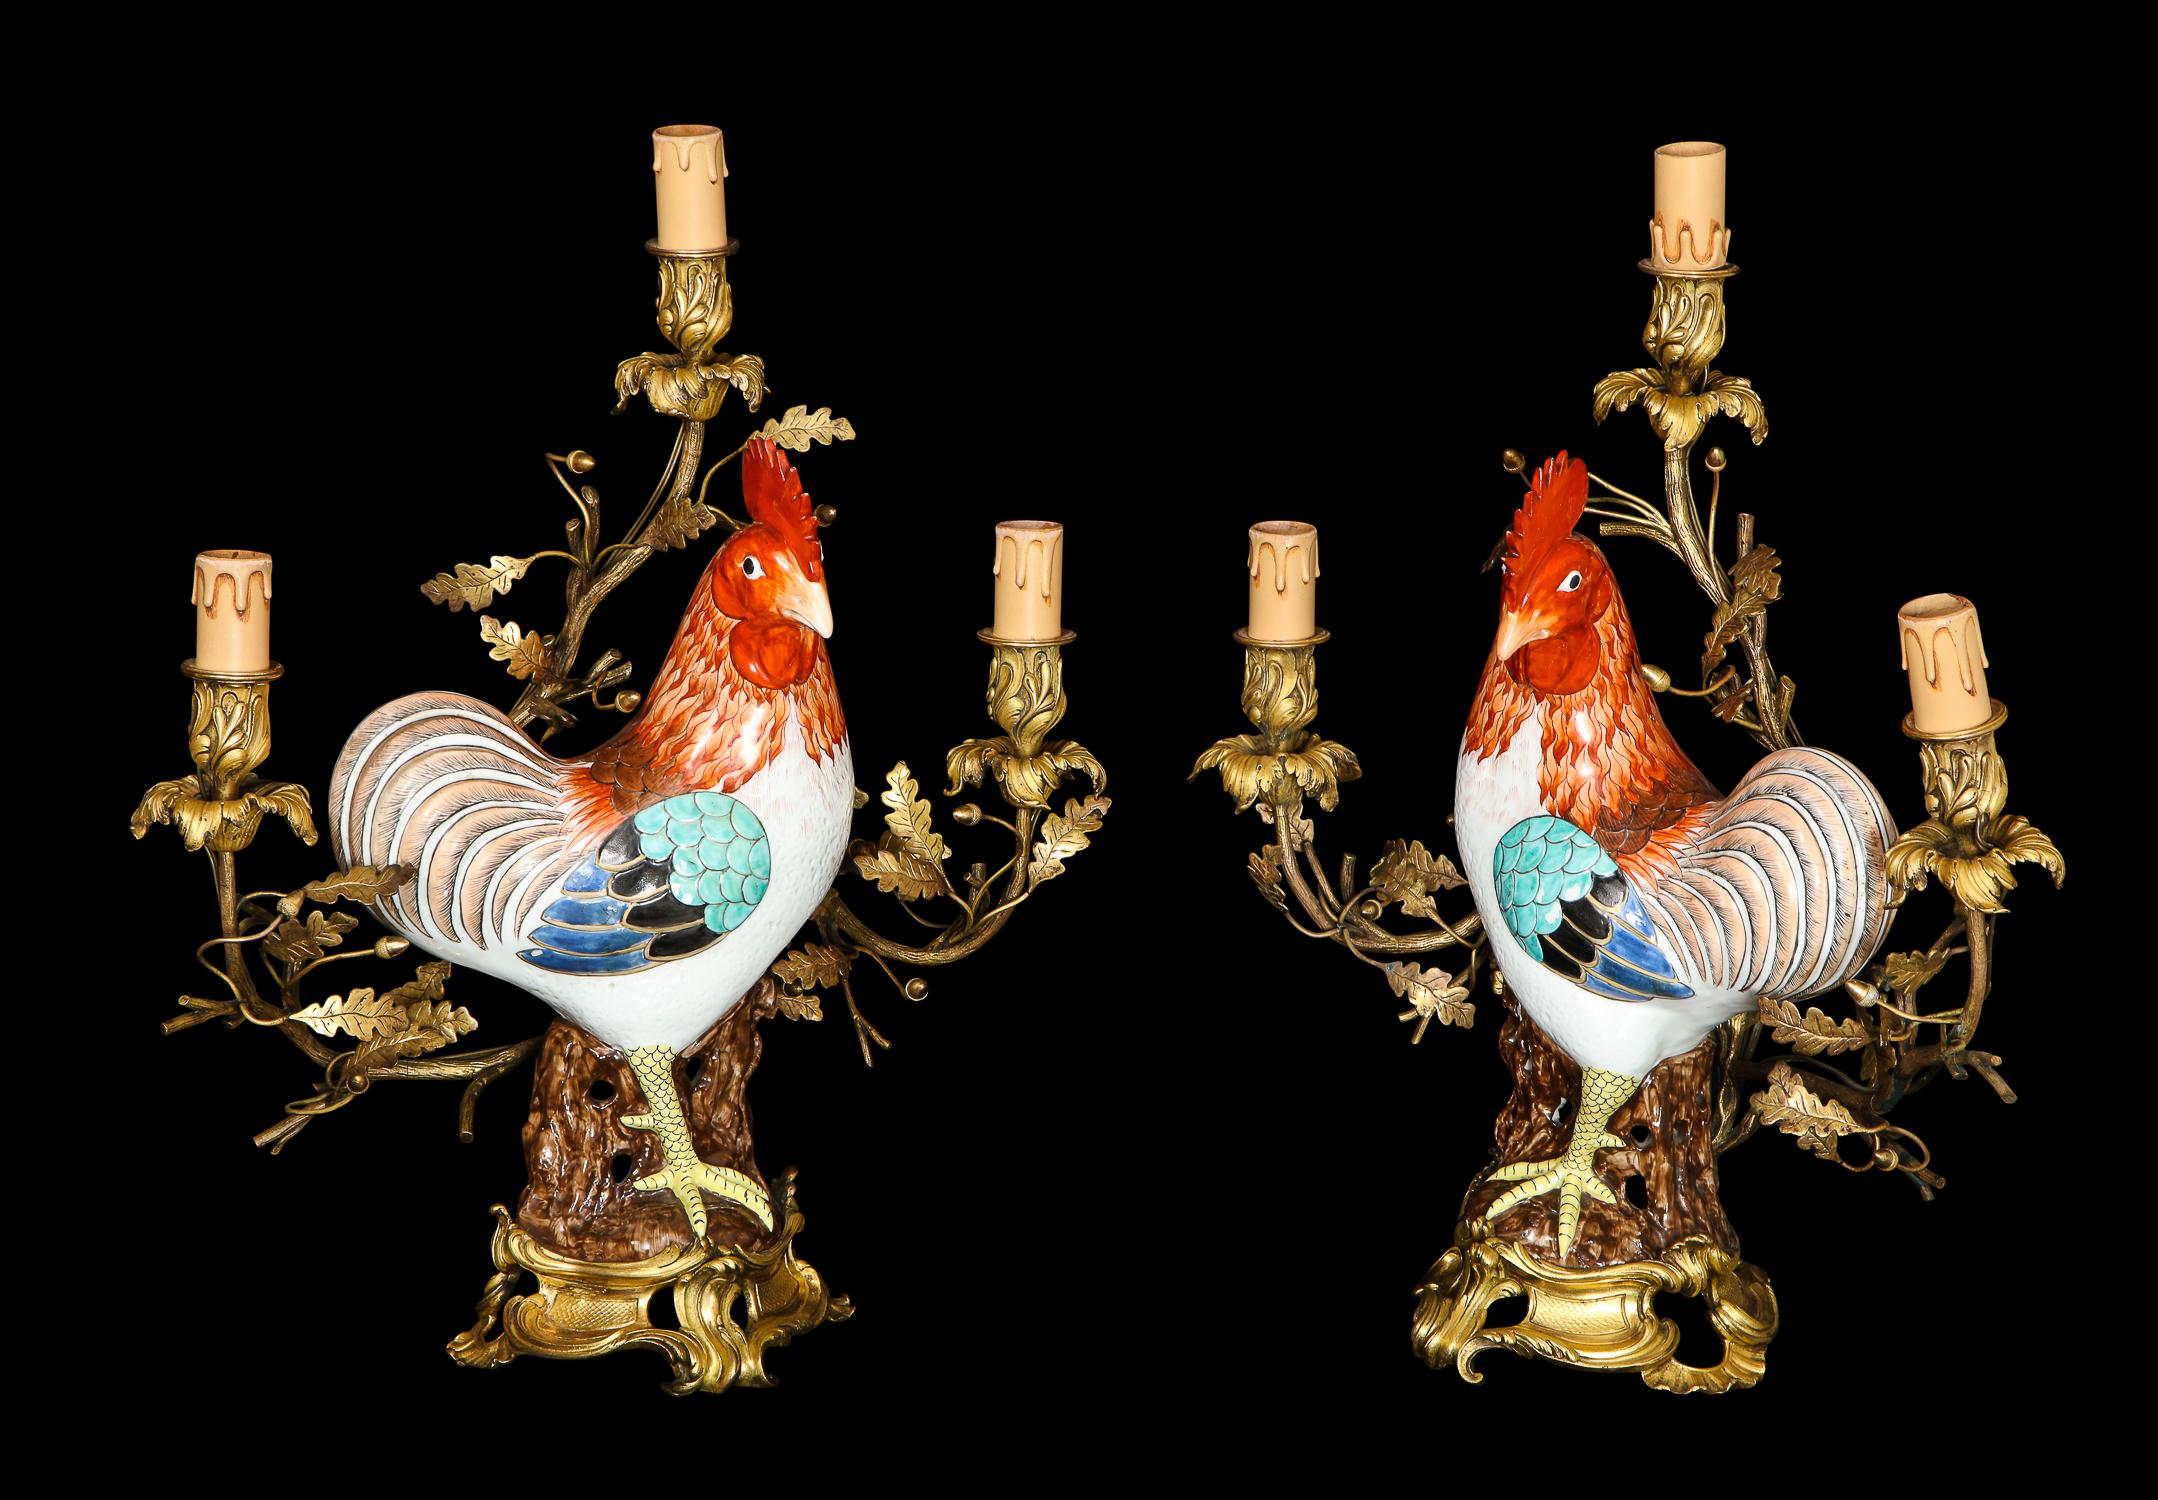 A pair of spectacular and large antique Chinese export porcelain rooster transitional Louis XV/Louis XVI style gilt bronze mounted three arm candelabra lamps of superb quality embellished with fine sculptures of multicolored Chinese export porcelain